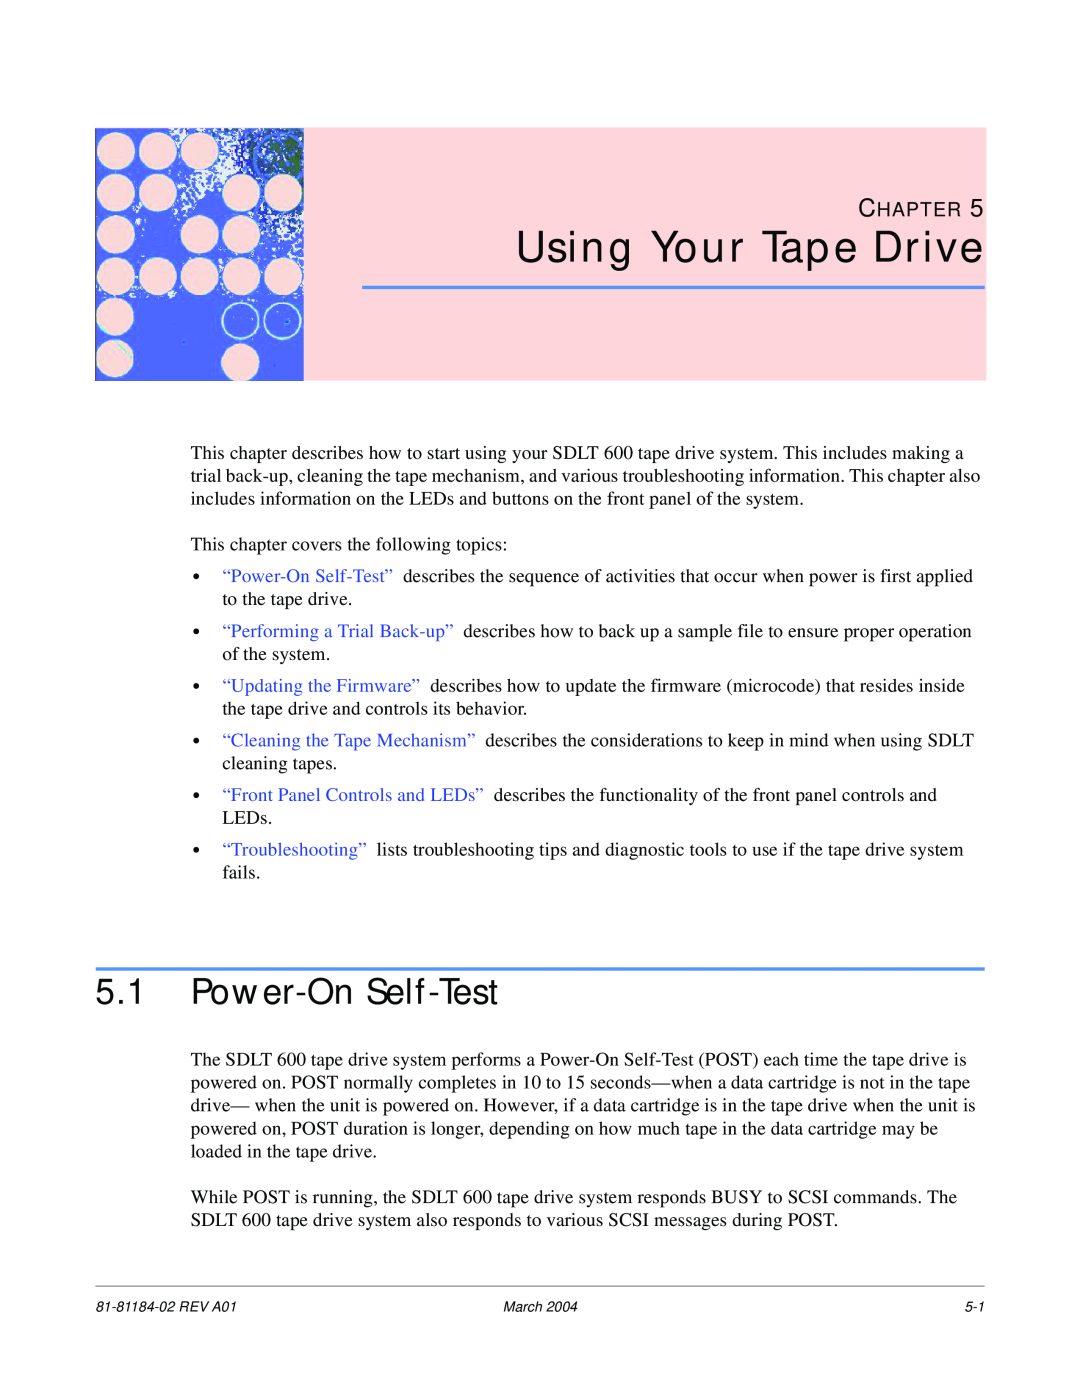 Tandberg Data 600 manual Using Your Tape Drive, Power-On Self-Test, Chapter 